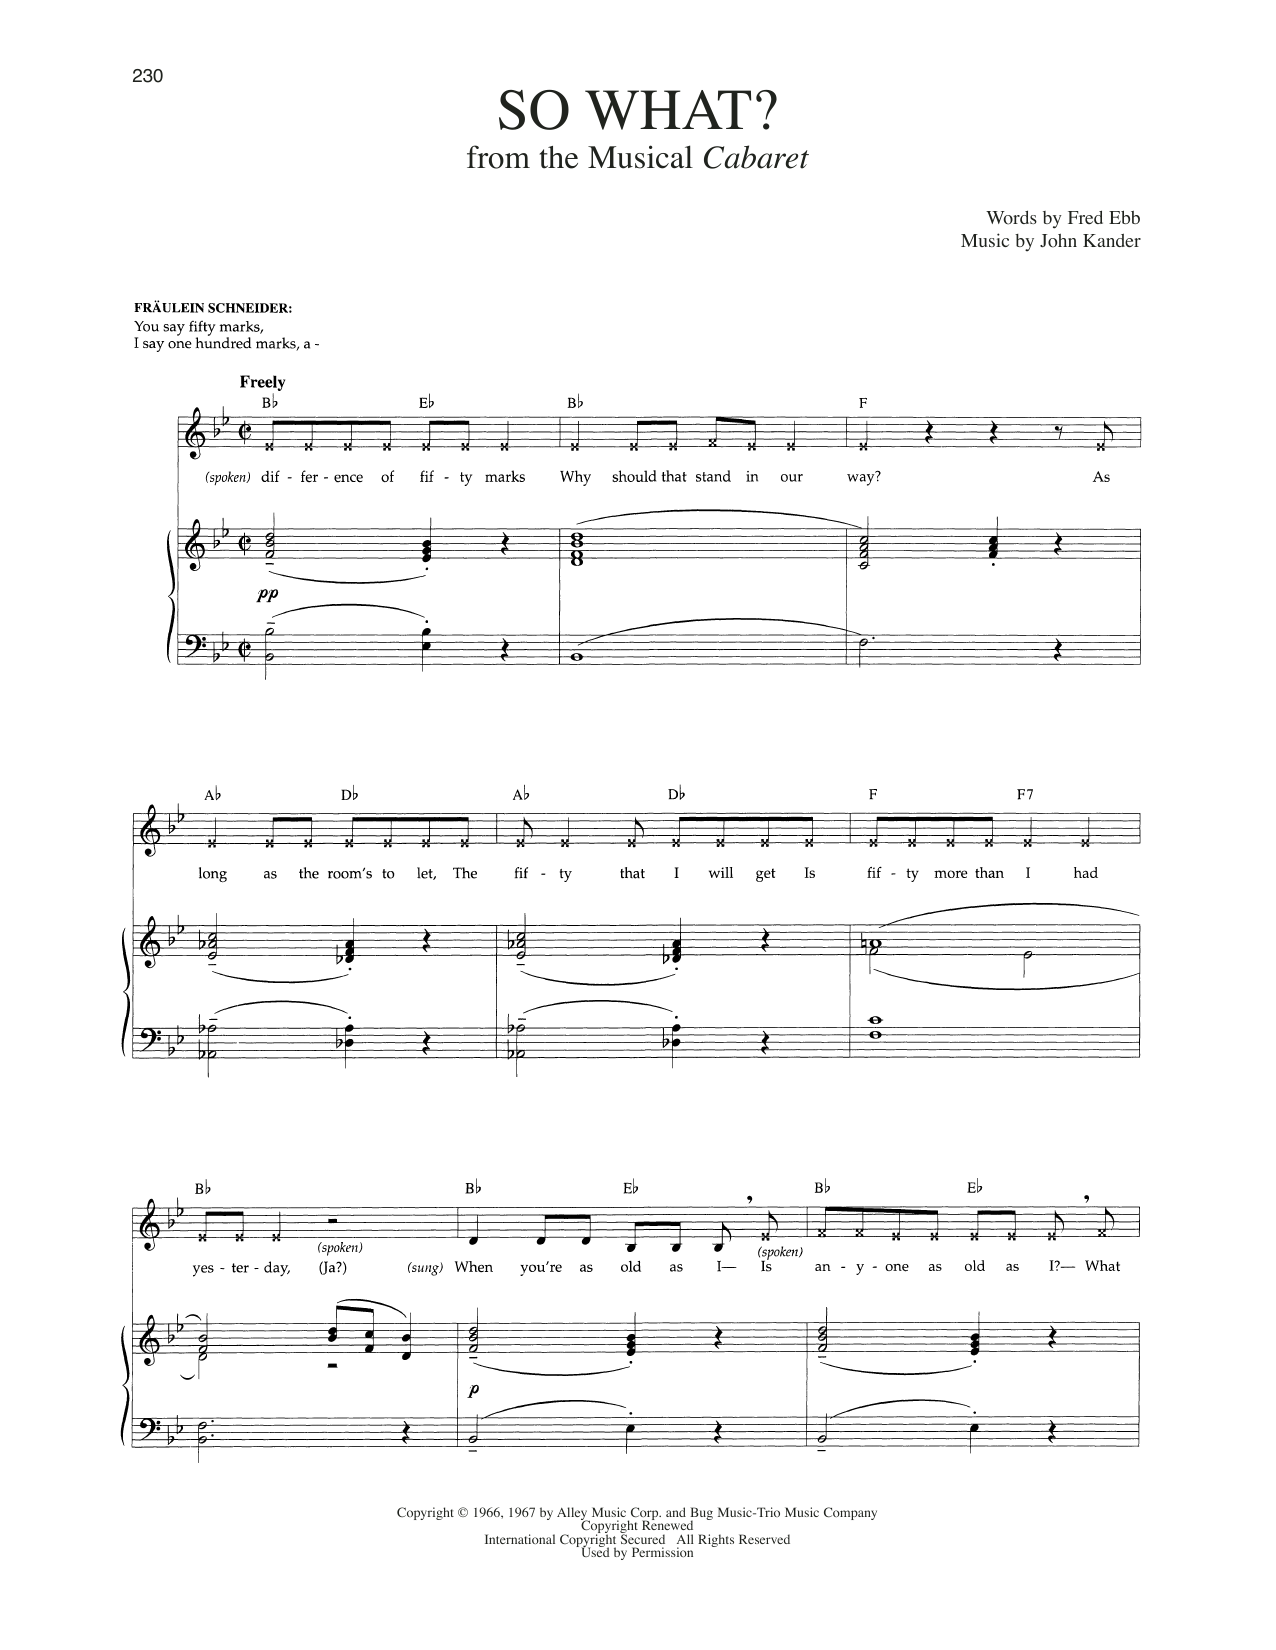 Download Kander & Ebb So What? (from Cabaret) Sheet Music